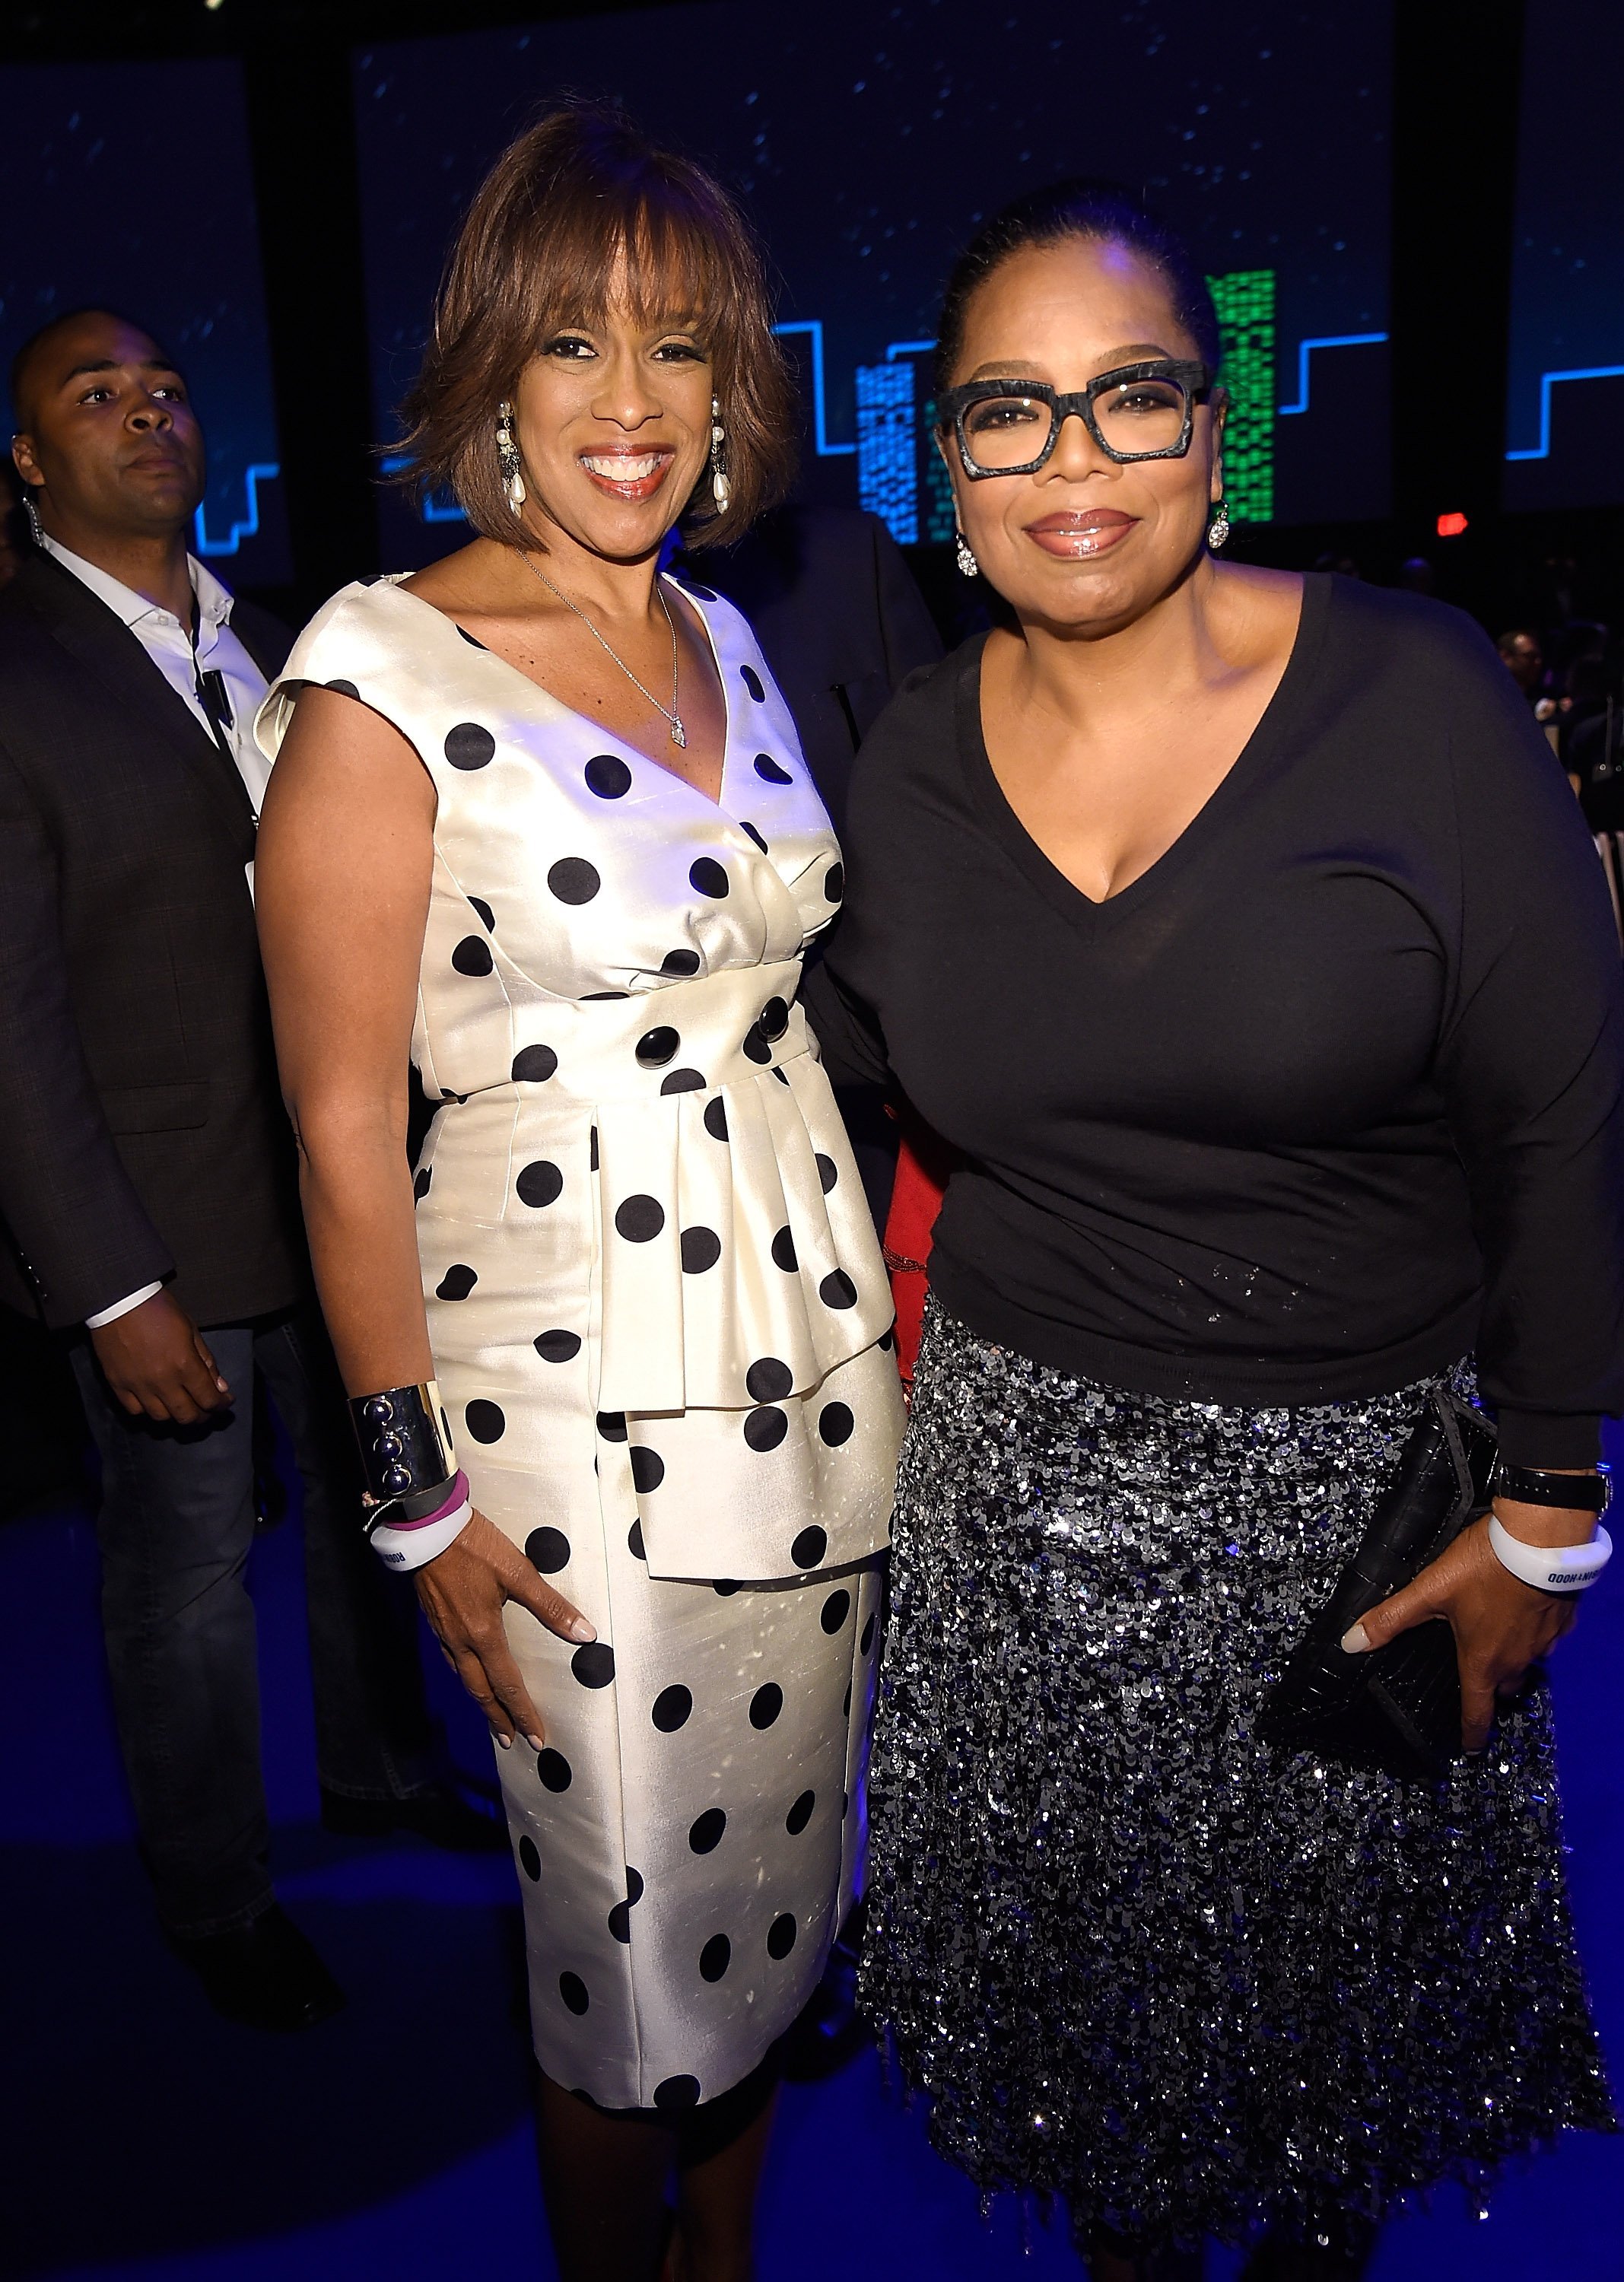 Oprah Winfrey and CBS "This Morning" host Gayle King | Photo: Getty Images